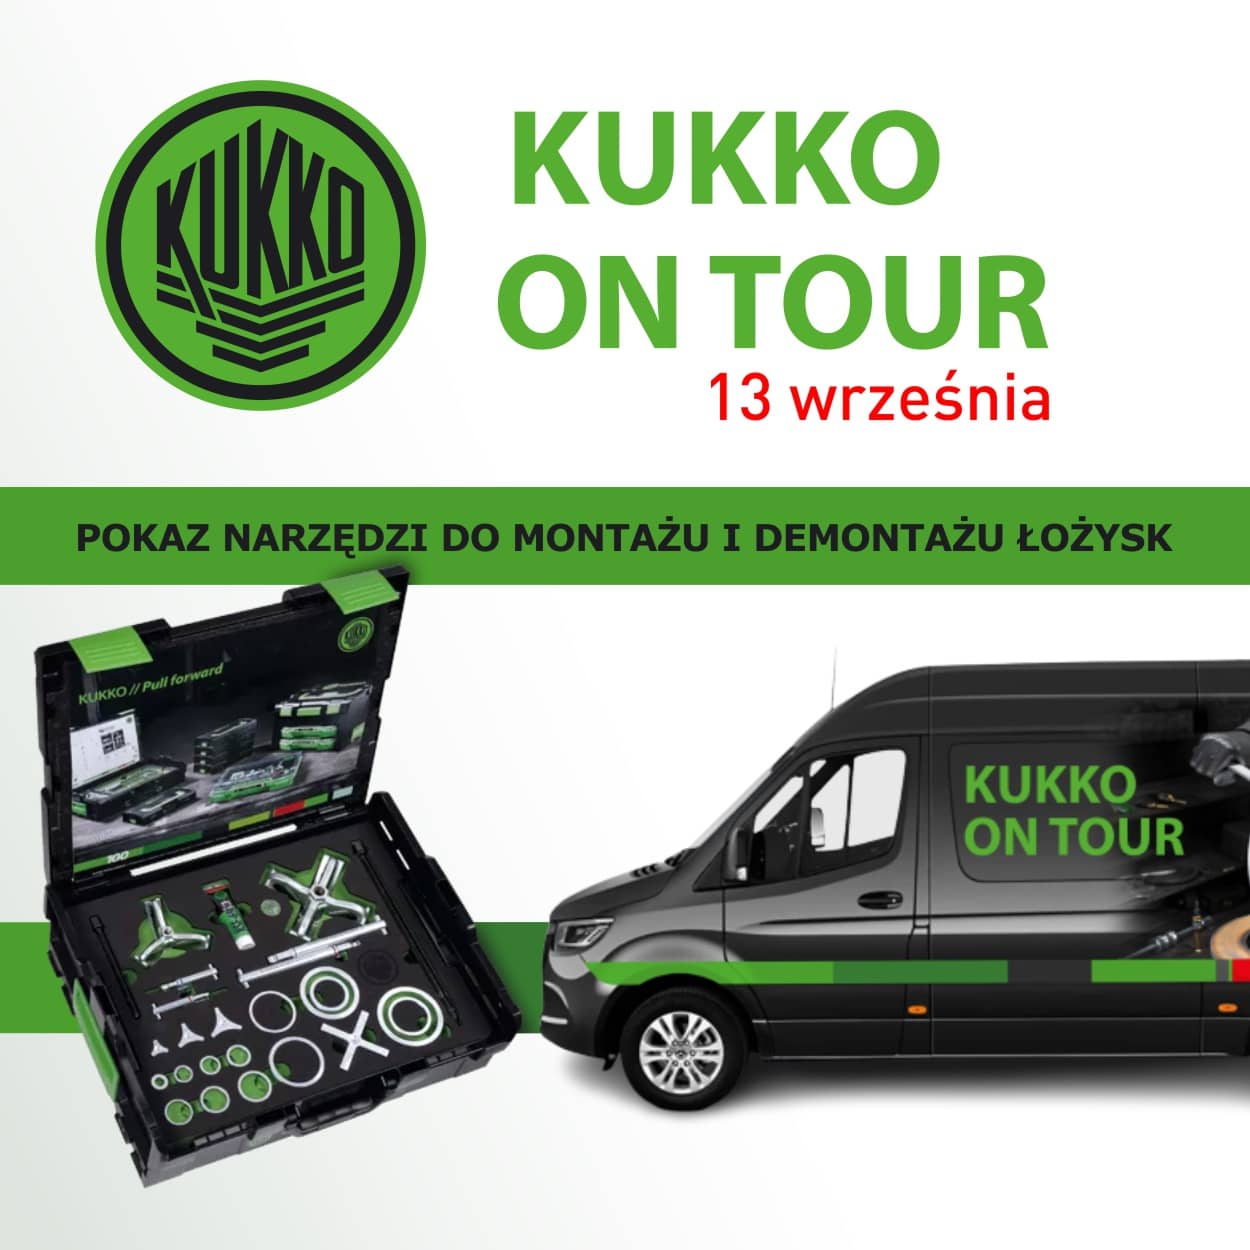 Visit our "Kukko on Tour" extraordinary event!